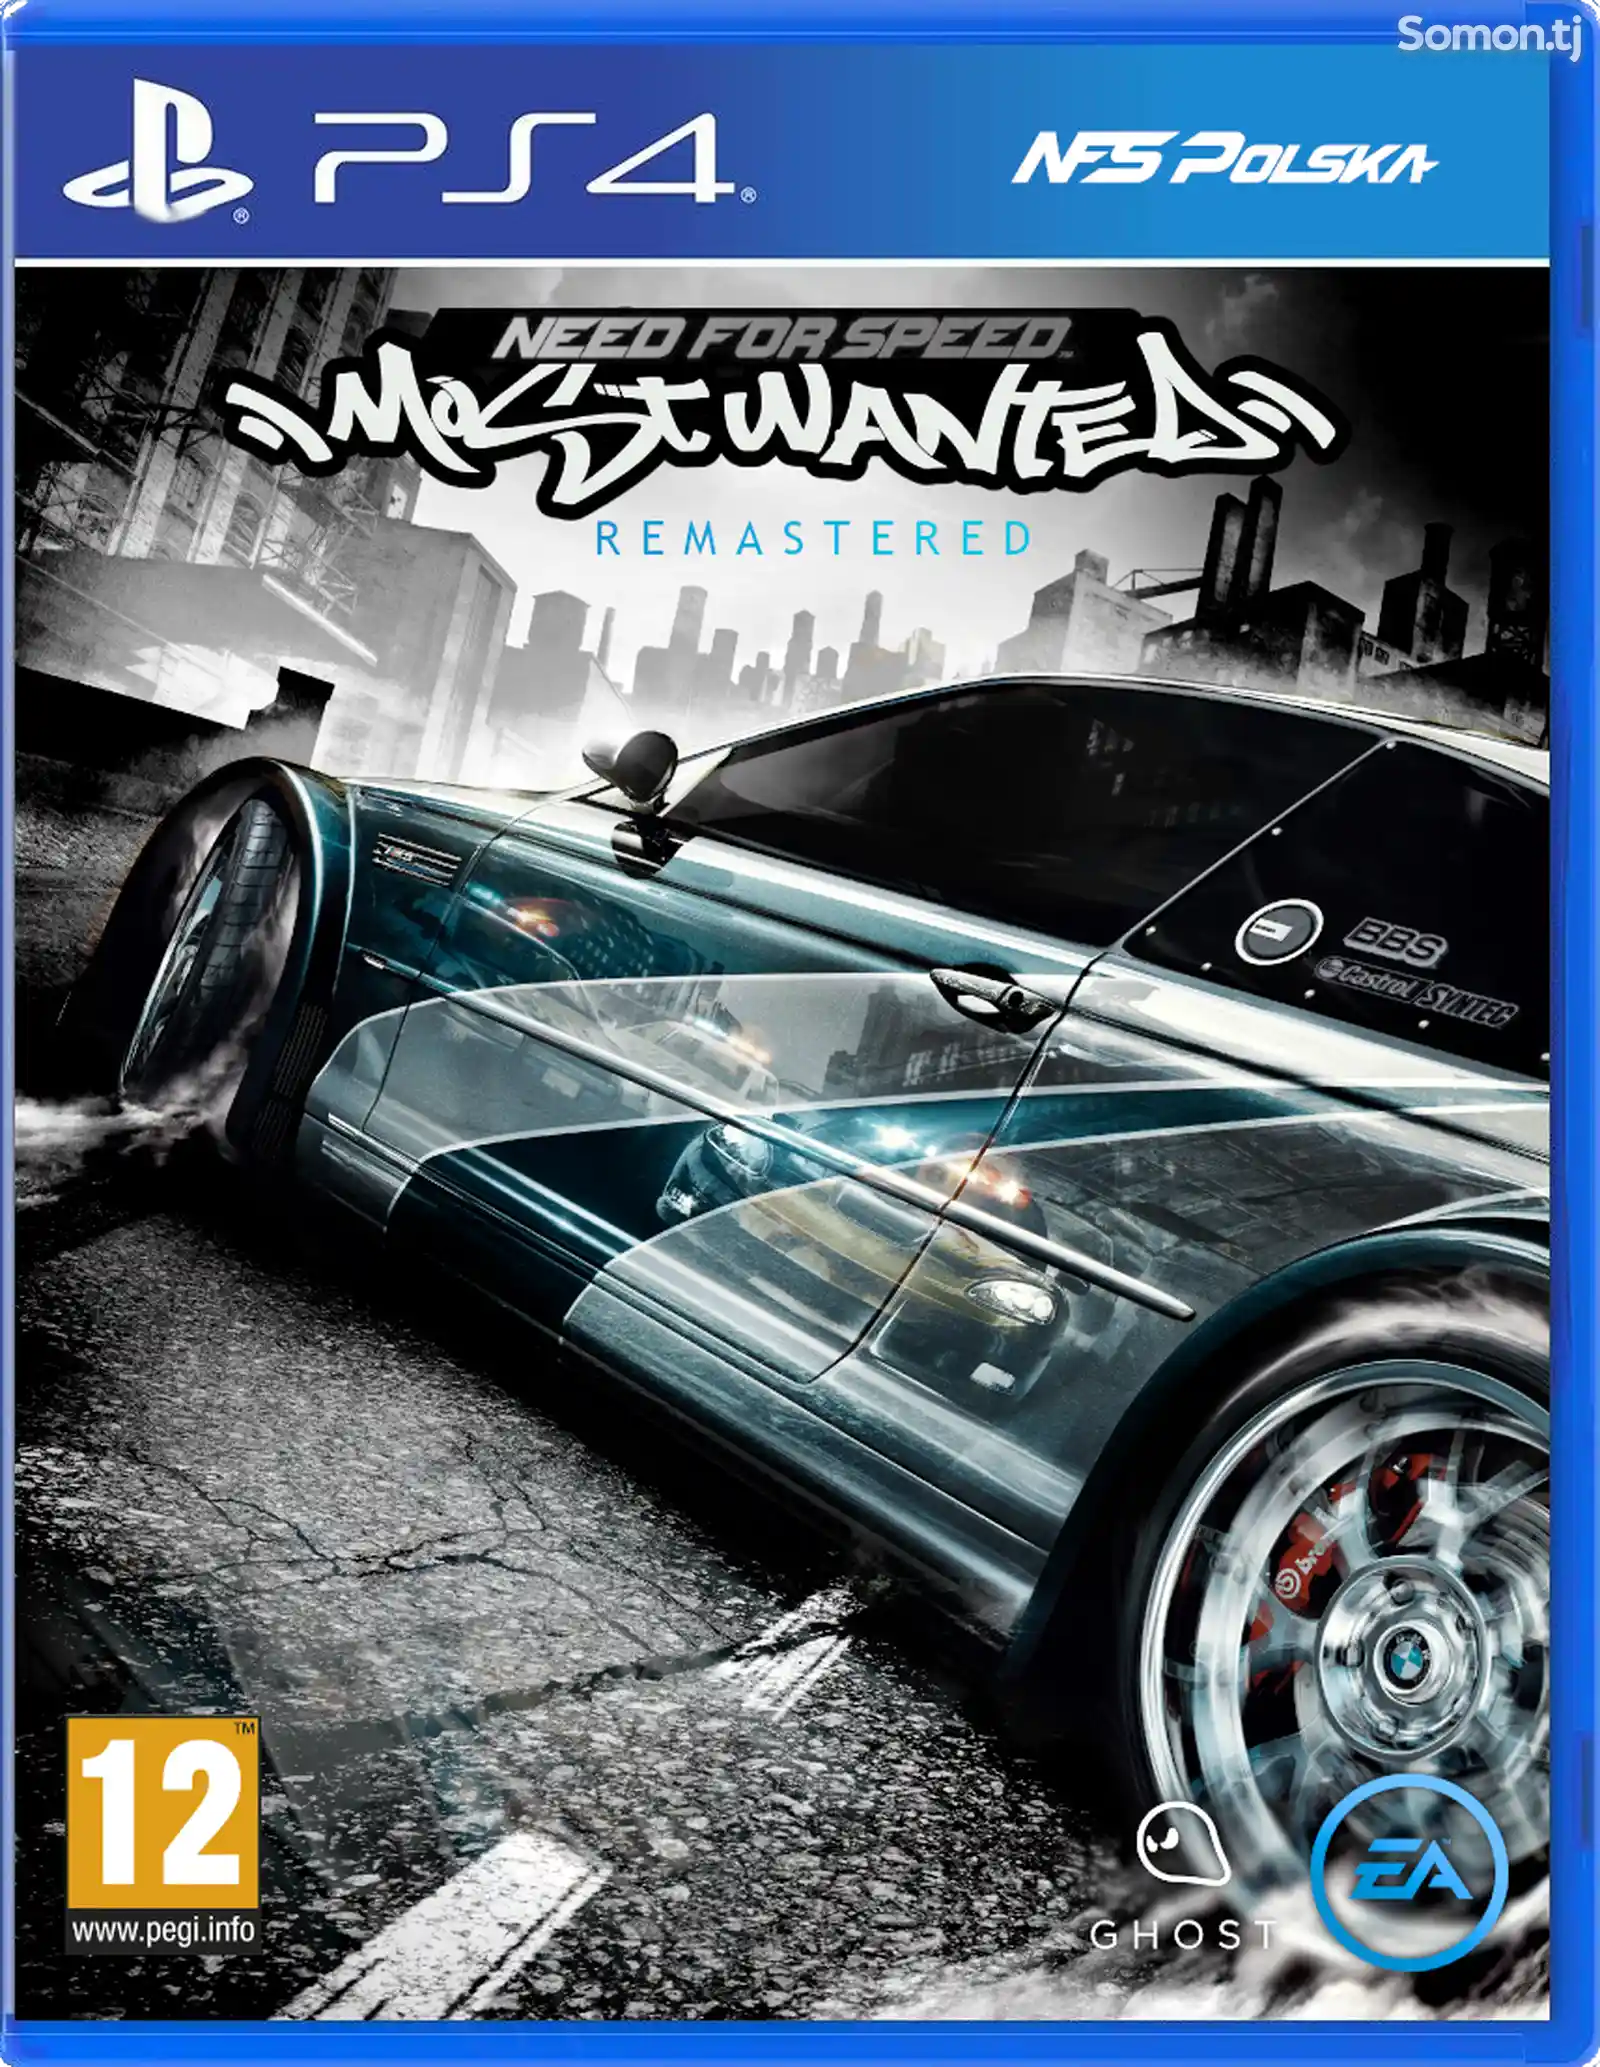 Игра Need for Speed Most Wanted PS-4 / 5.05 / 6.72 / 7.02 / 7.55 / 9.00 /